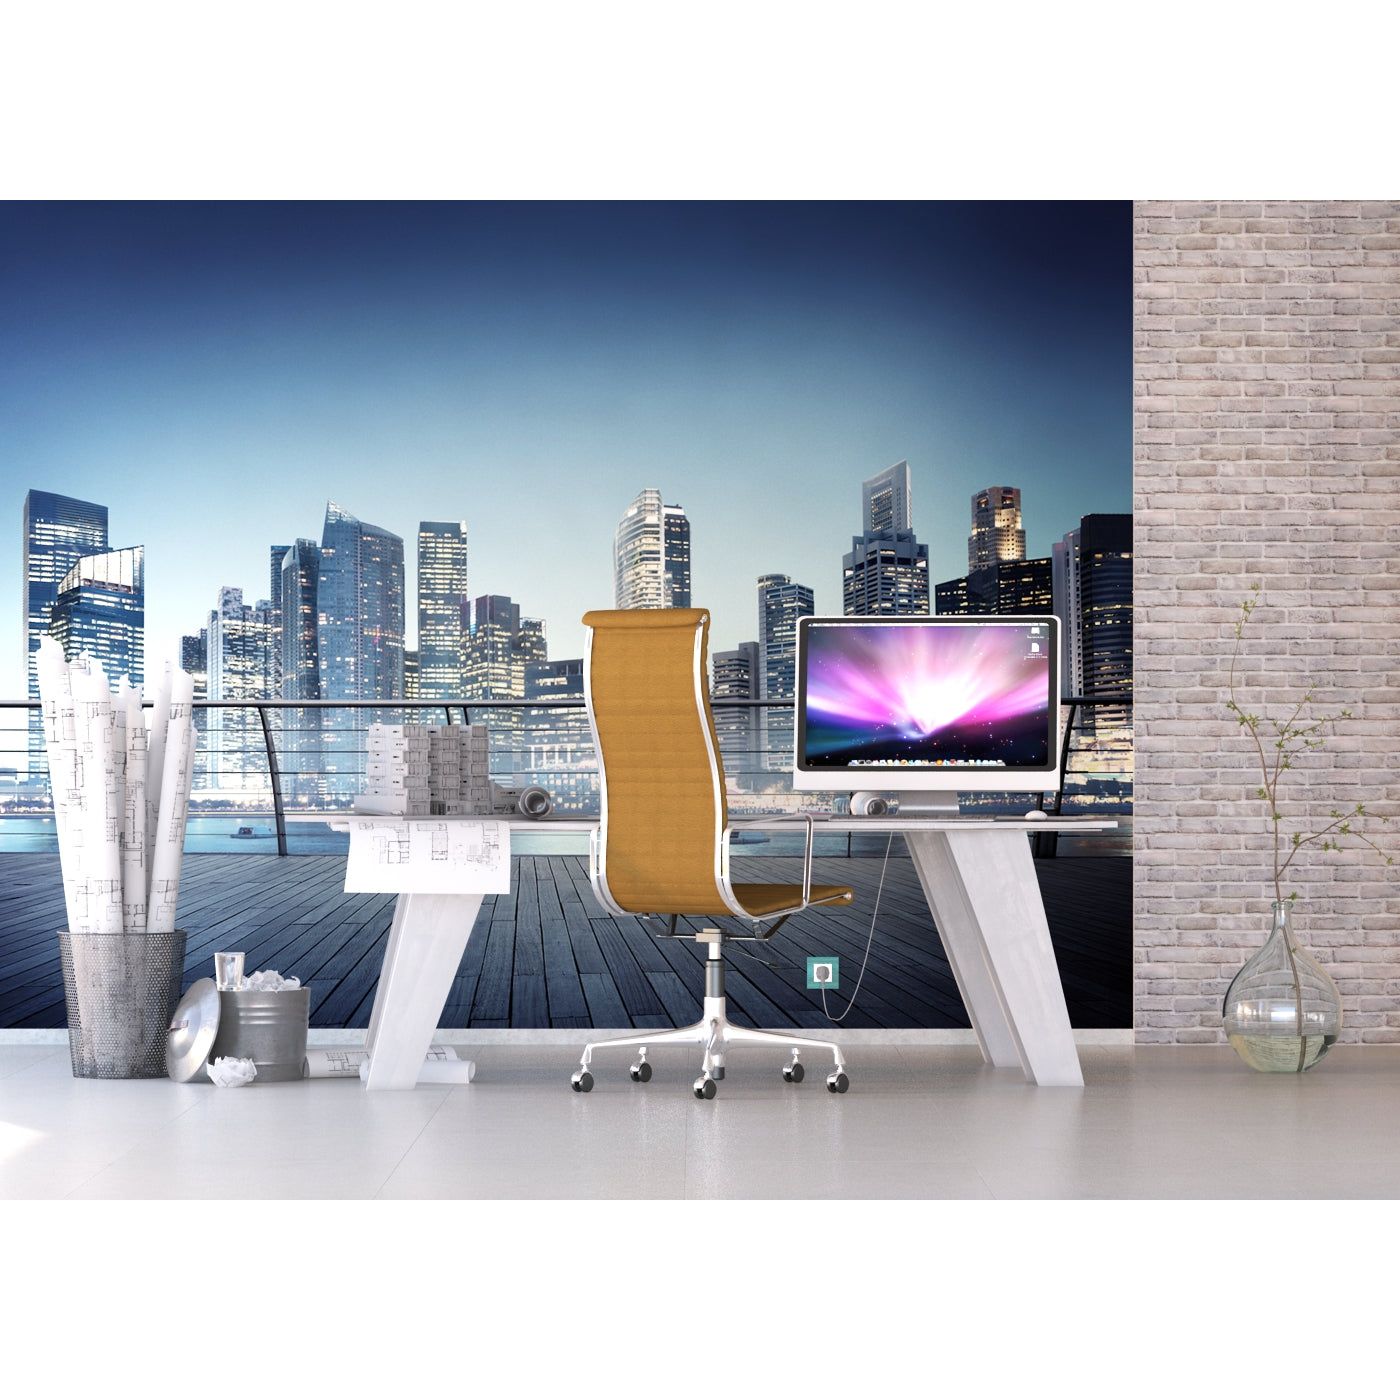 Cityscape Serenity: Waterfront Skyline at Dusk Wall Mural